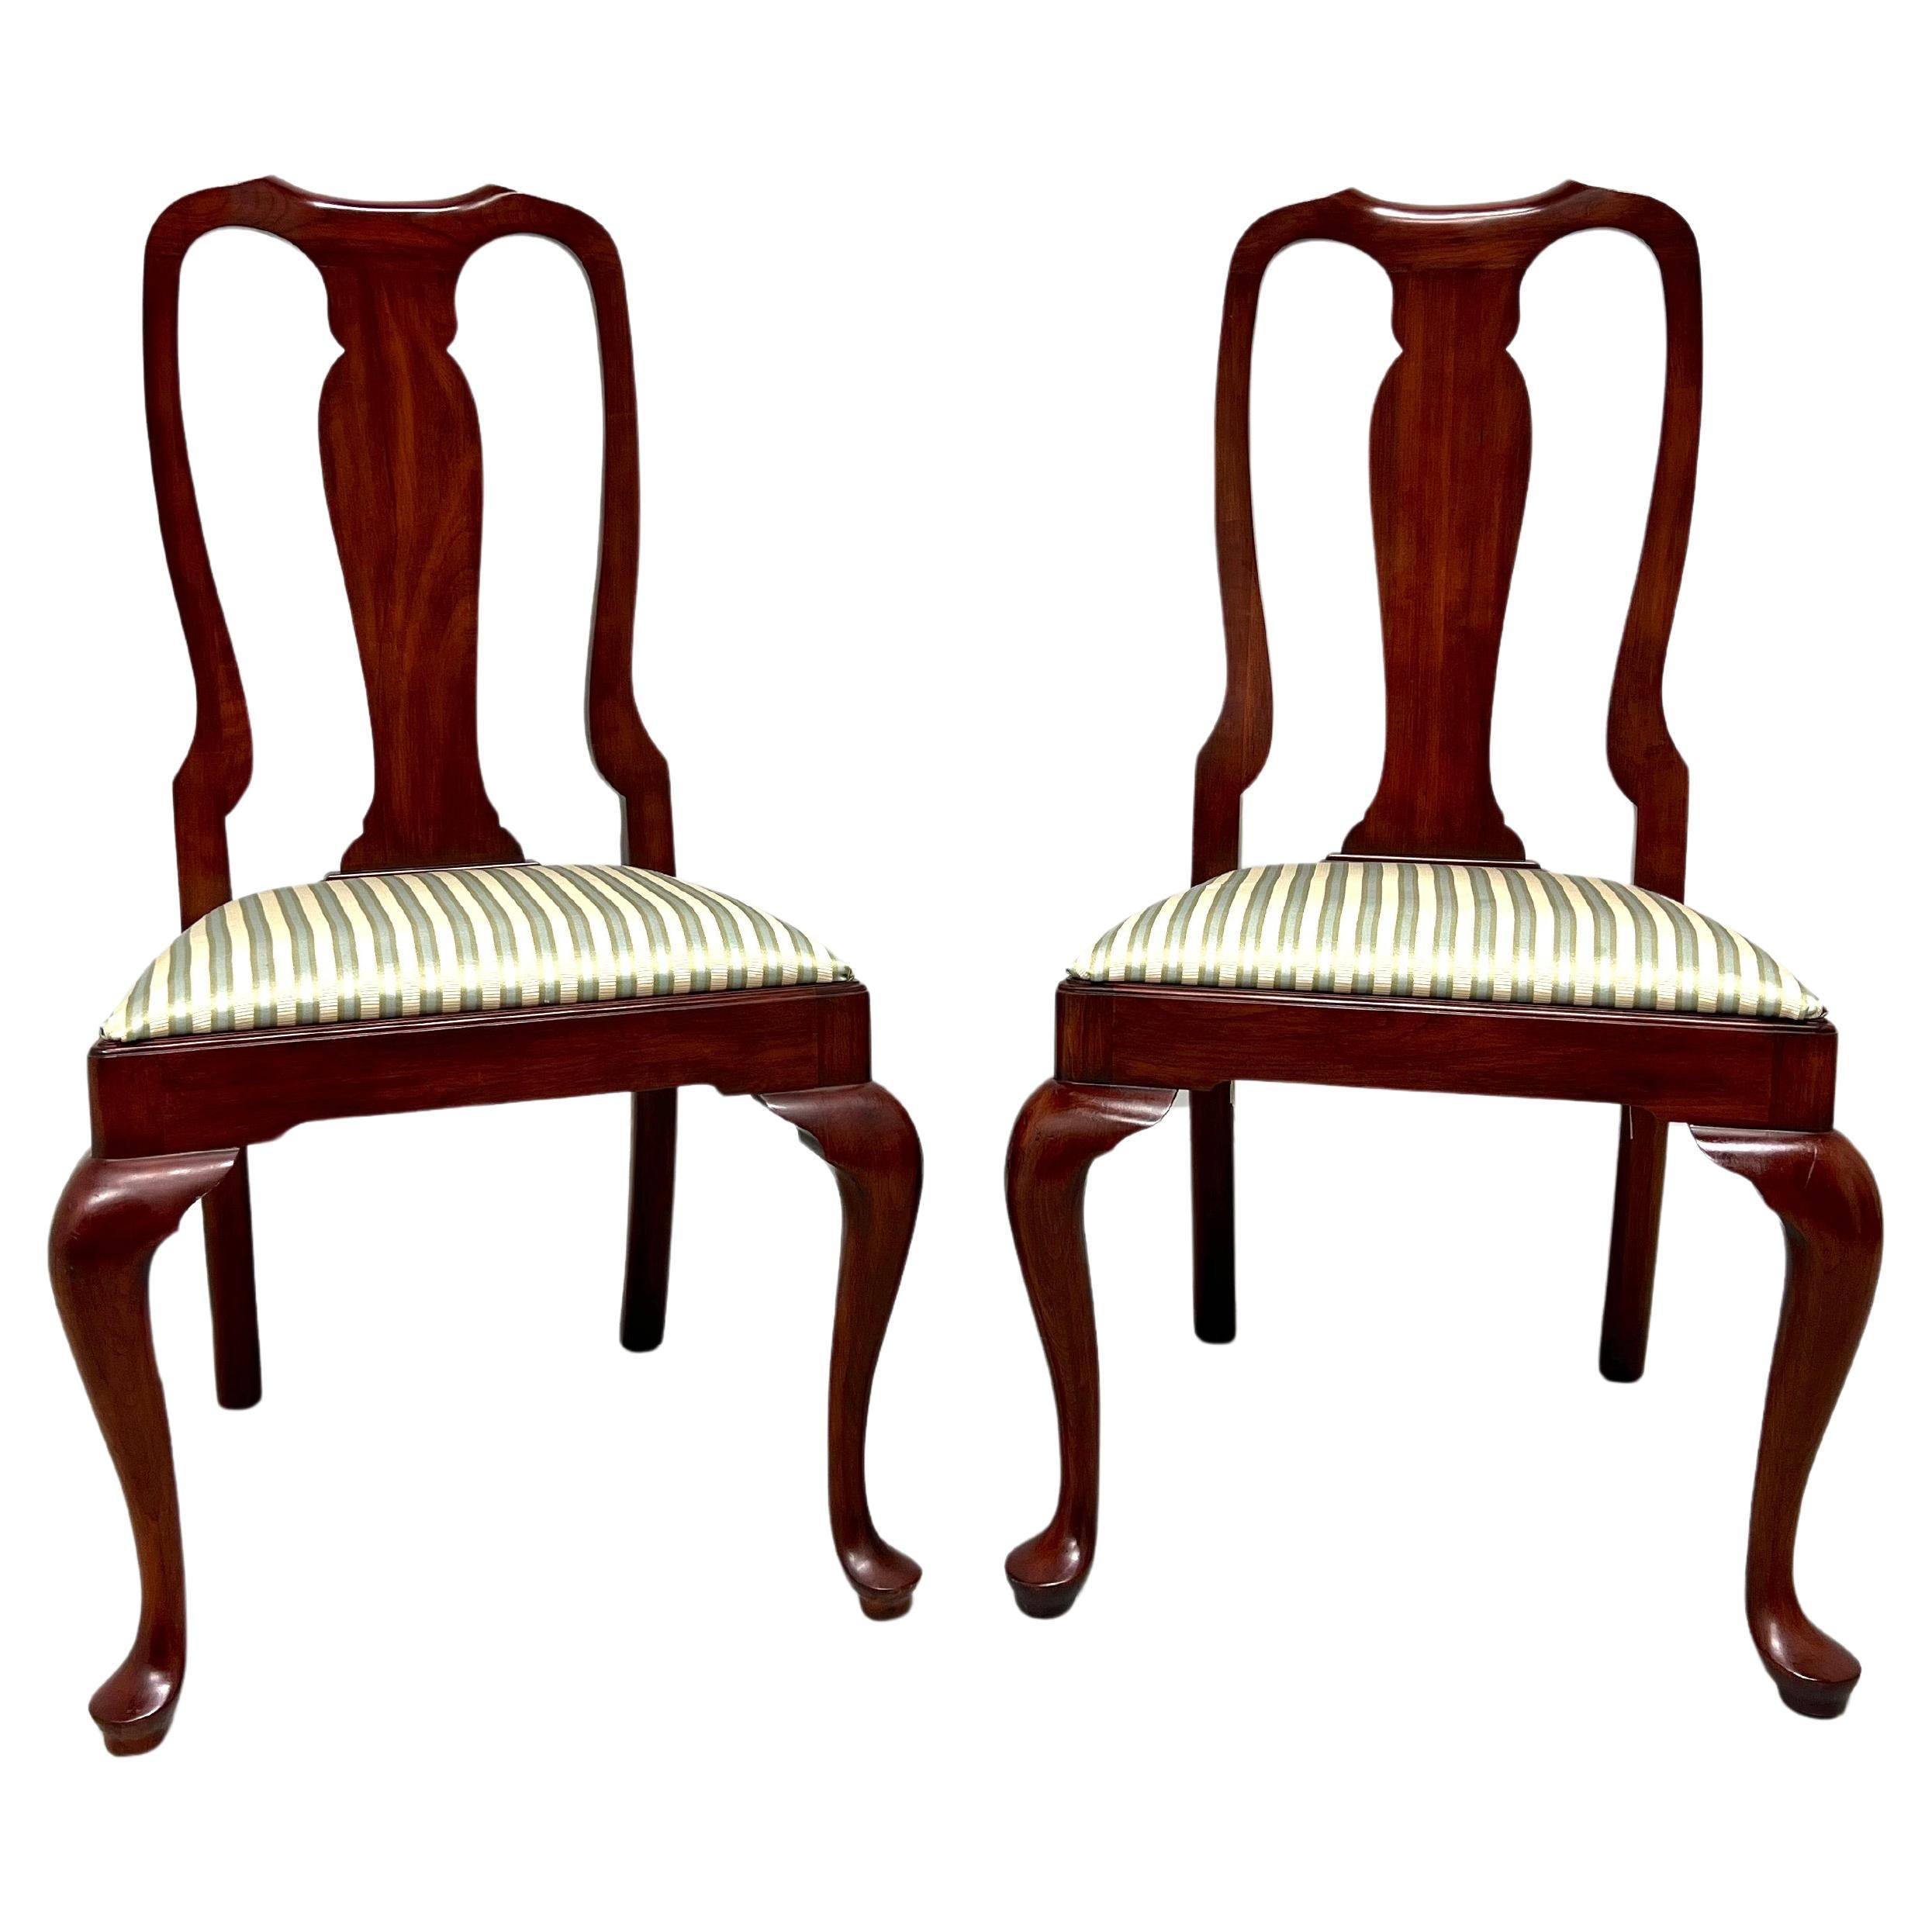 HENKEL HARRIS 105S 24 Wild Black Cherry Queen Anne Dining Side Chairs - Pair A For Sale